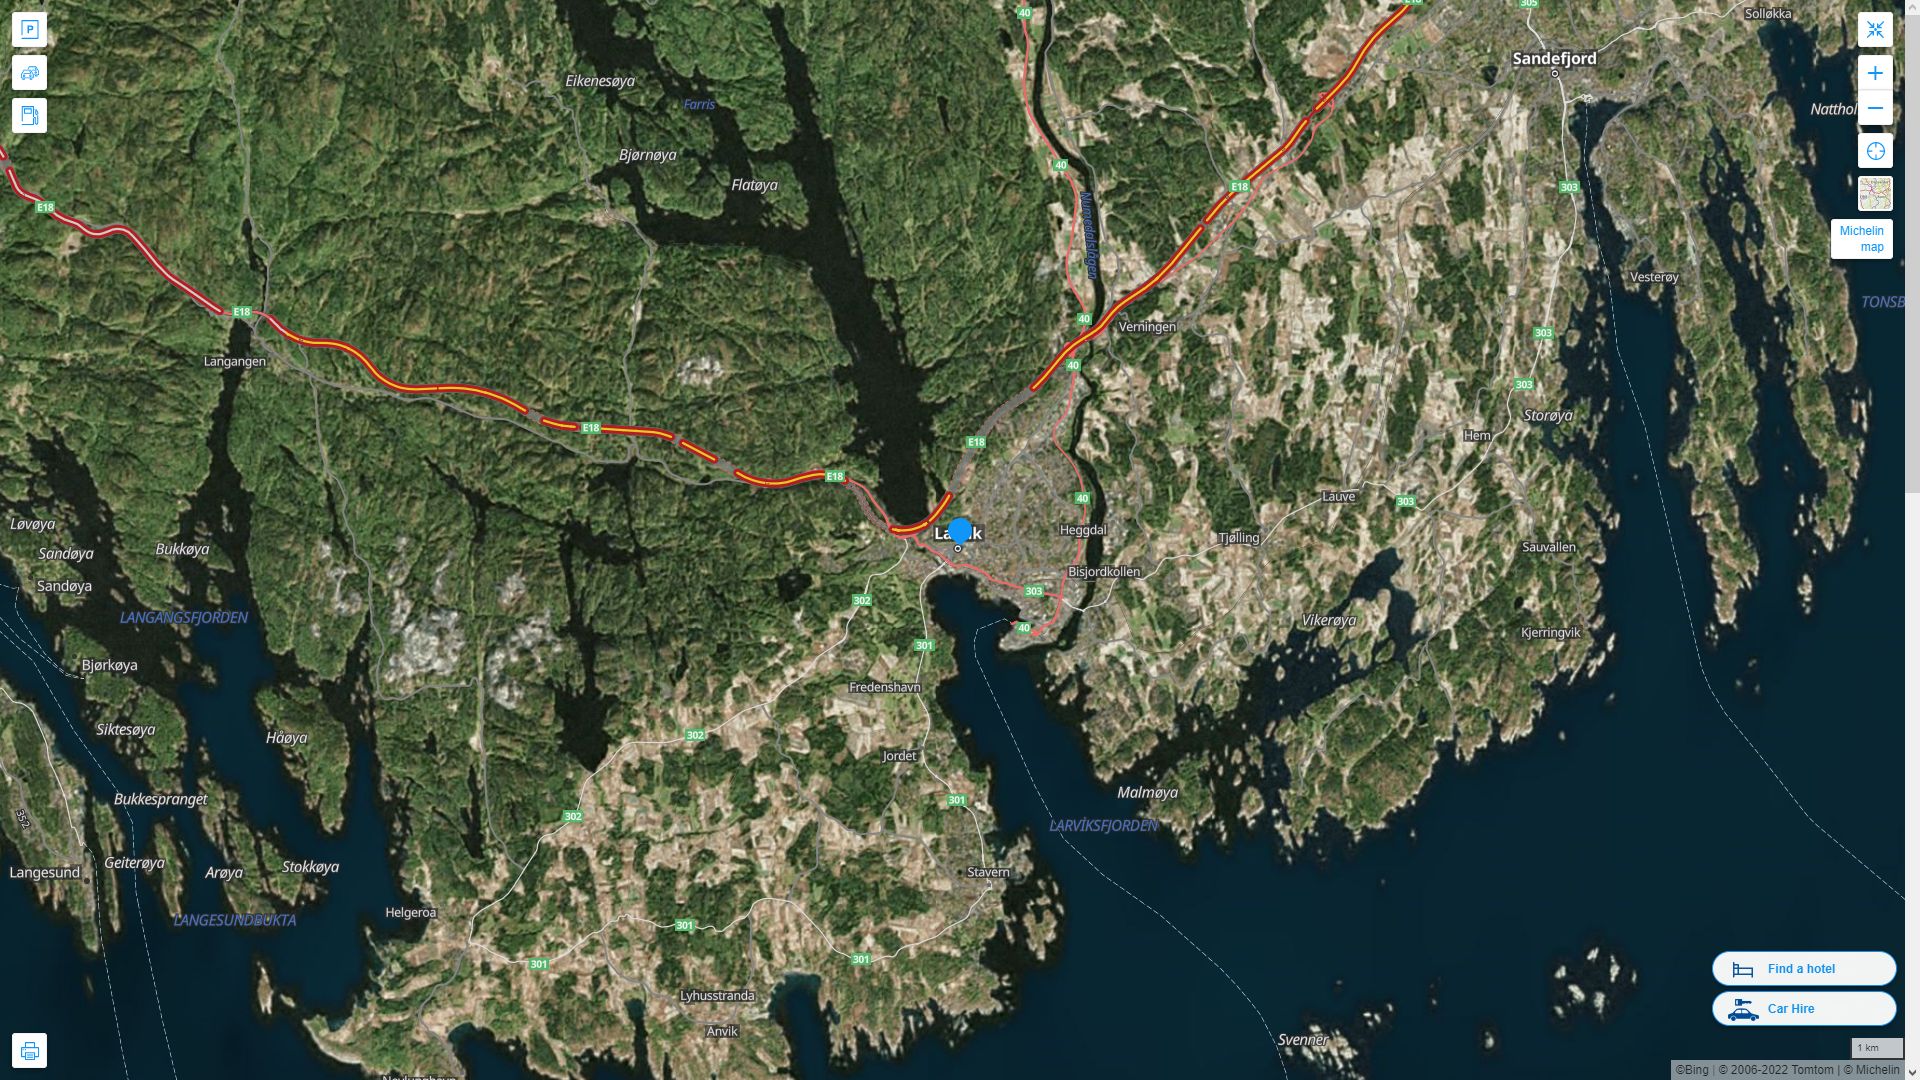 Larvik Highway and Road Map with Satellite View